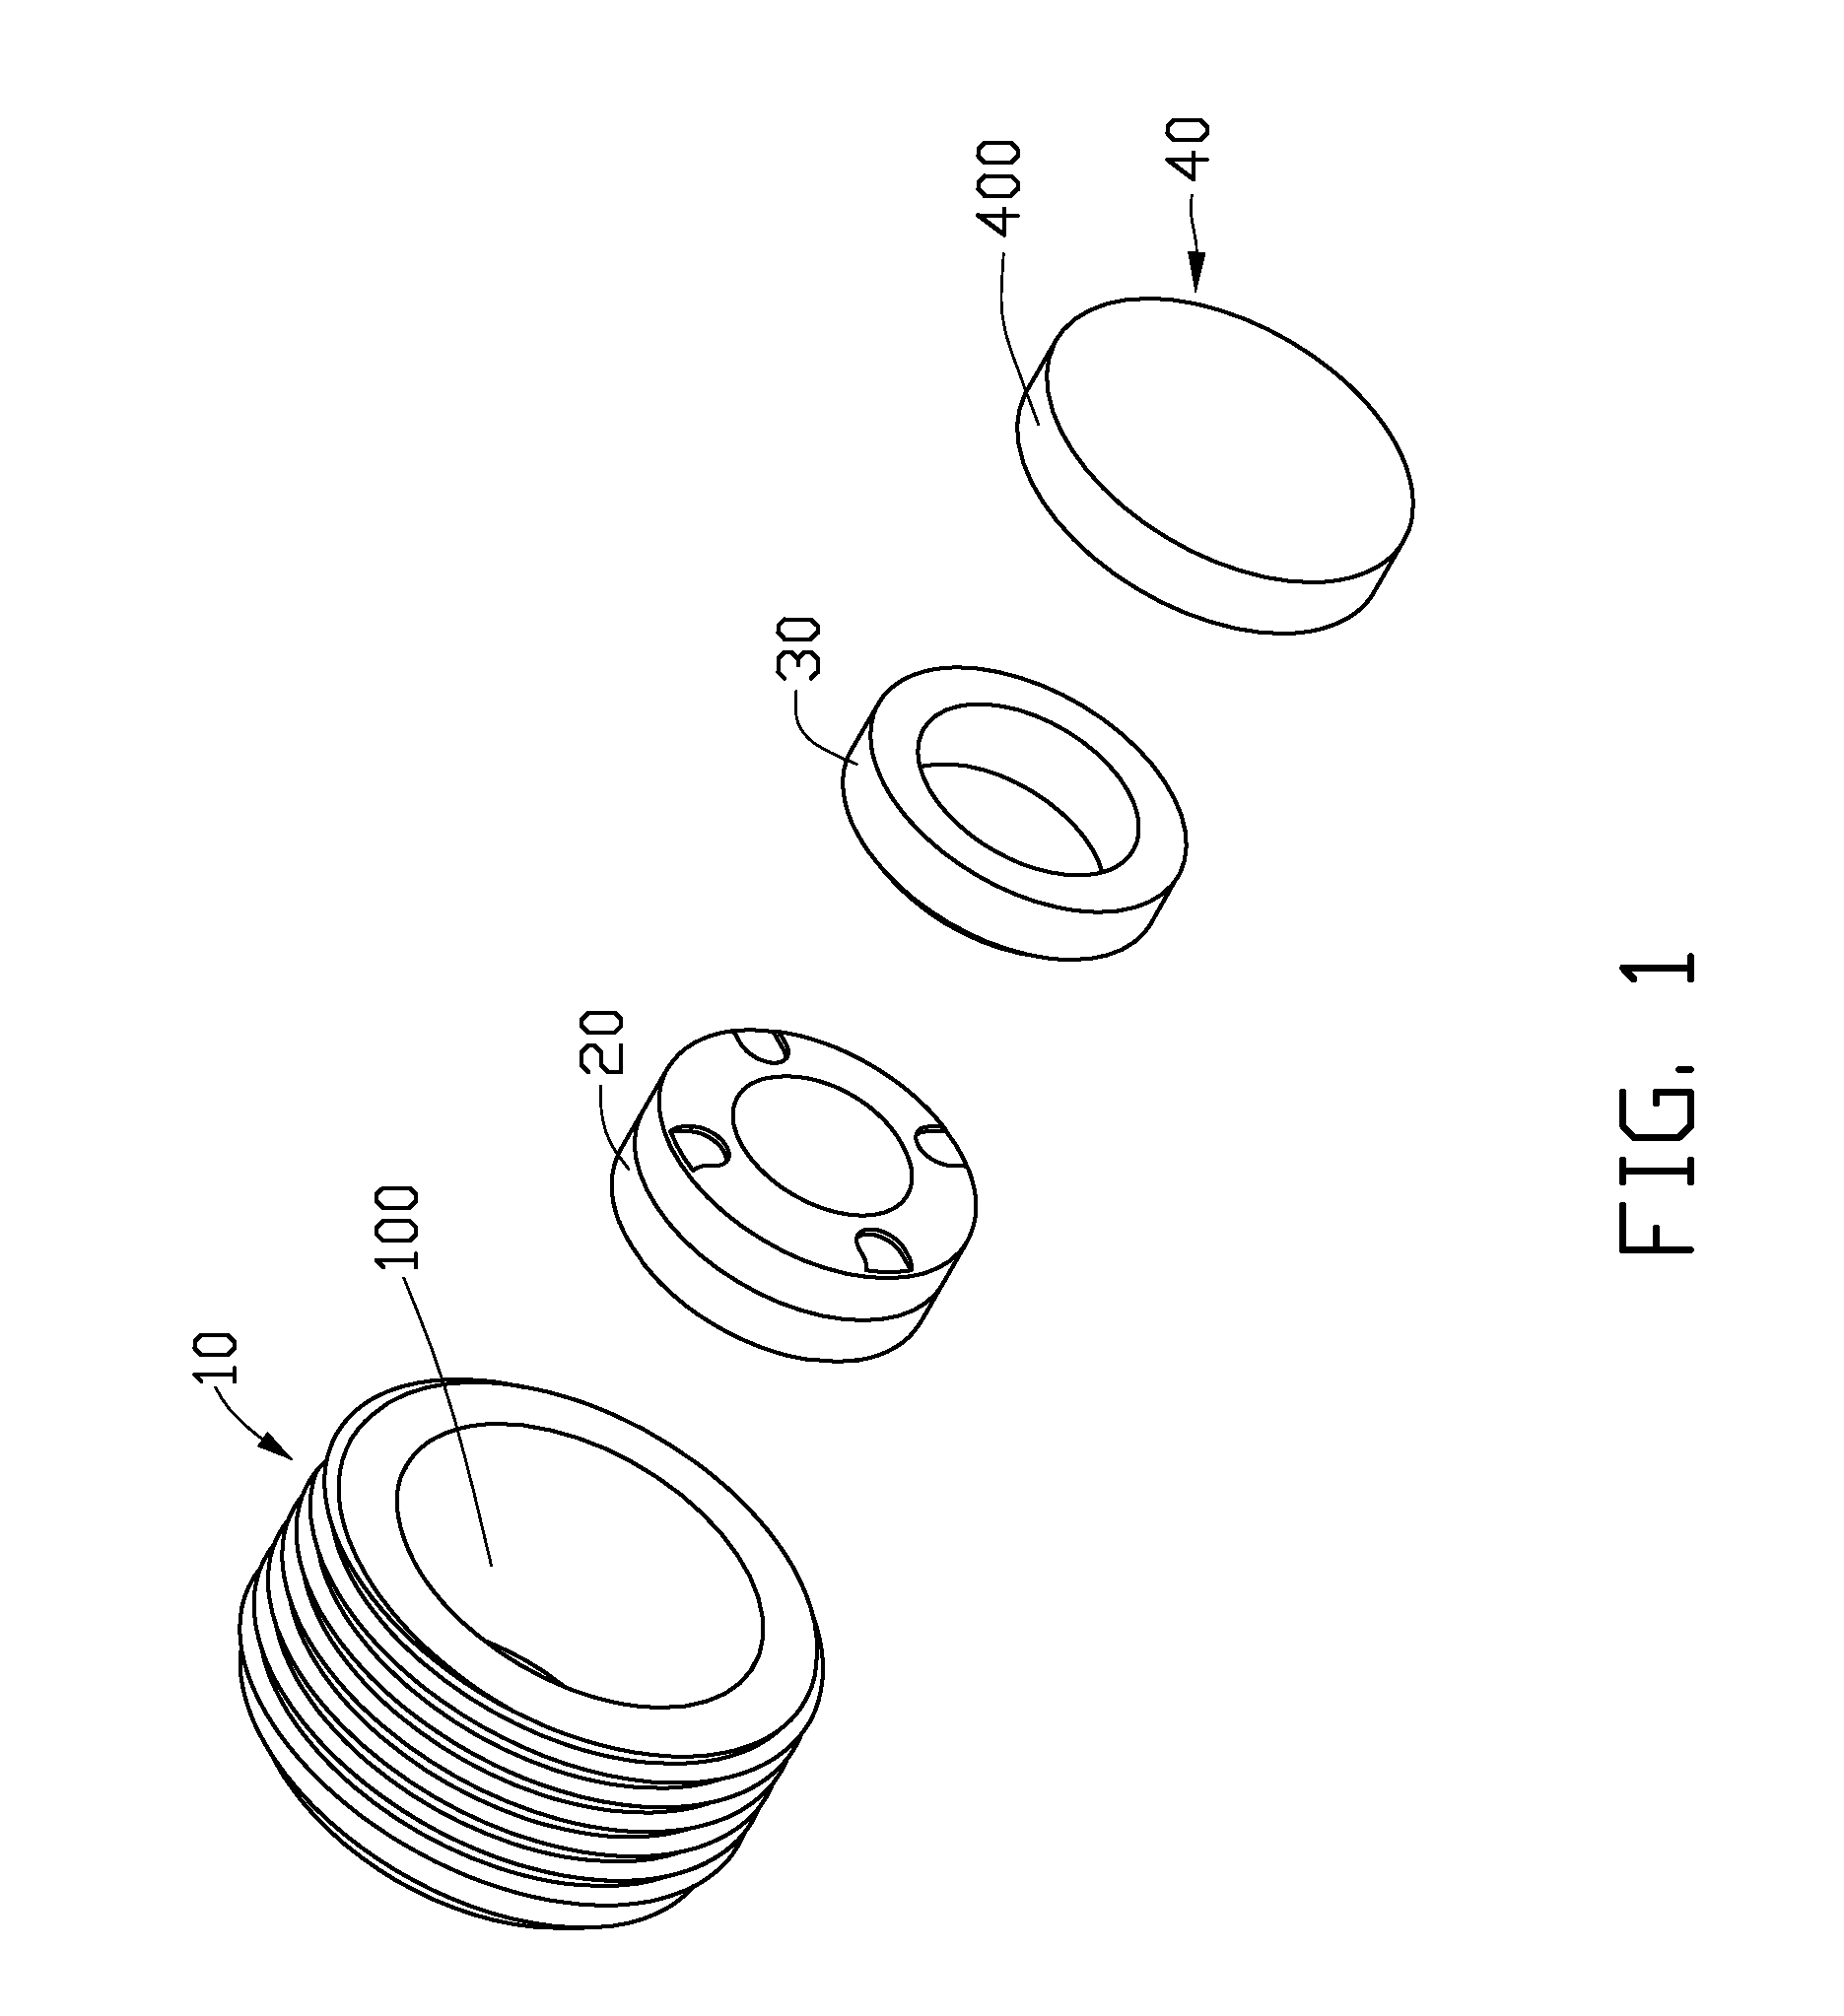 Optical module with adhesively mounted filter